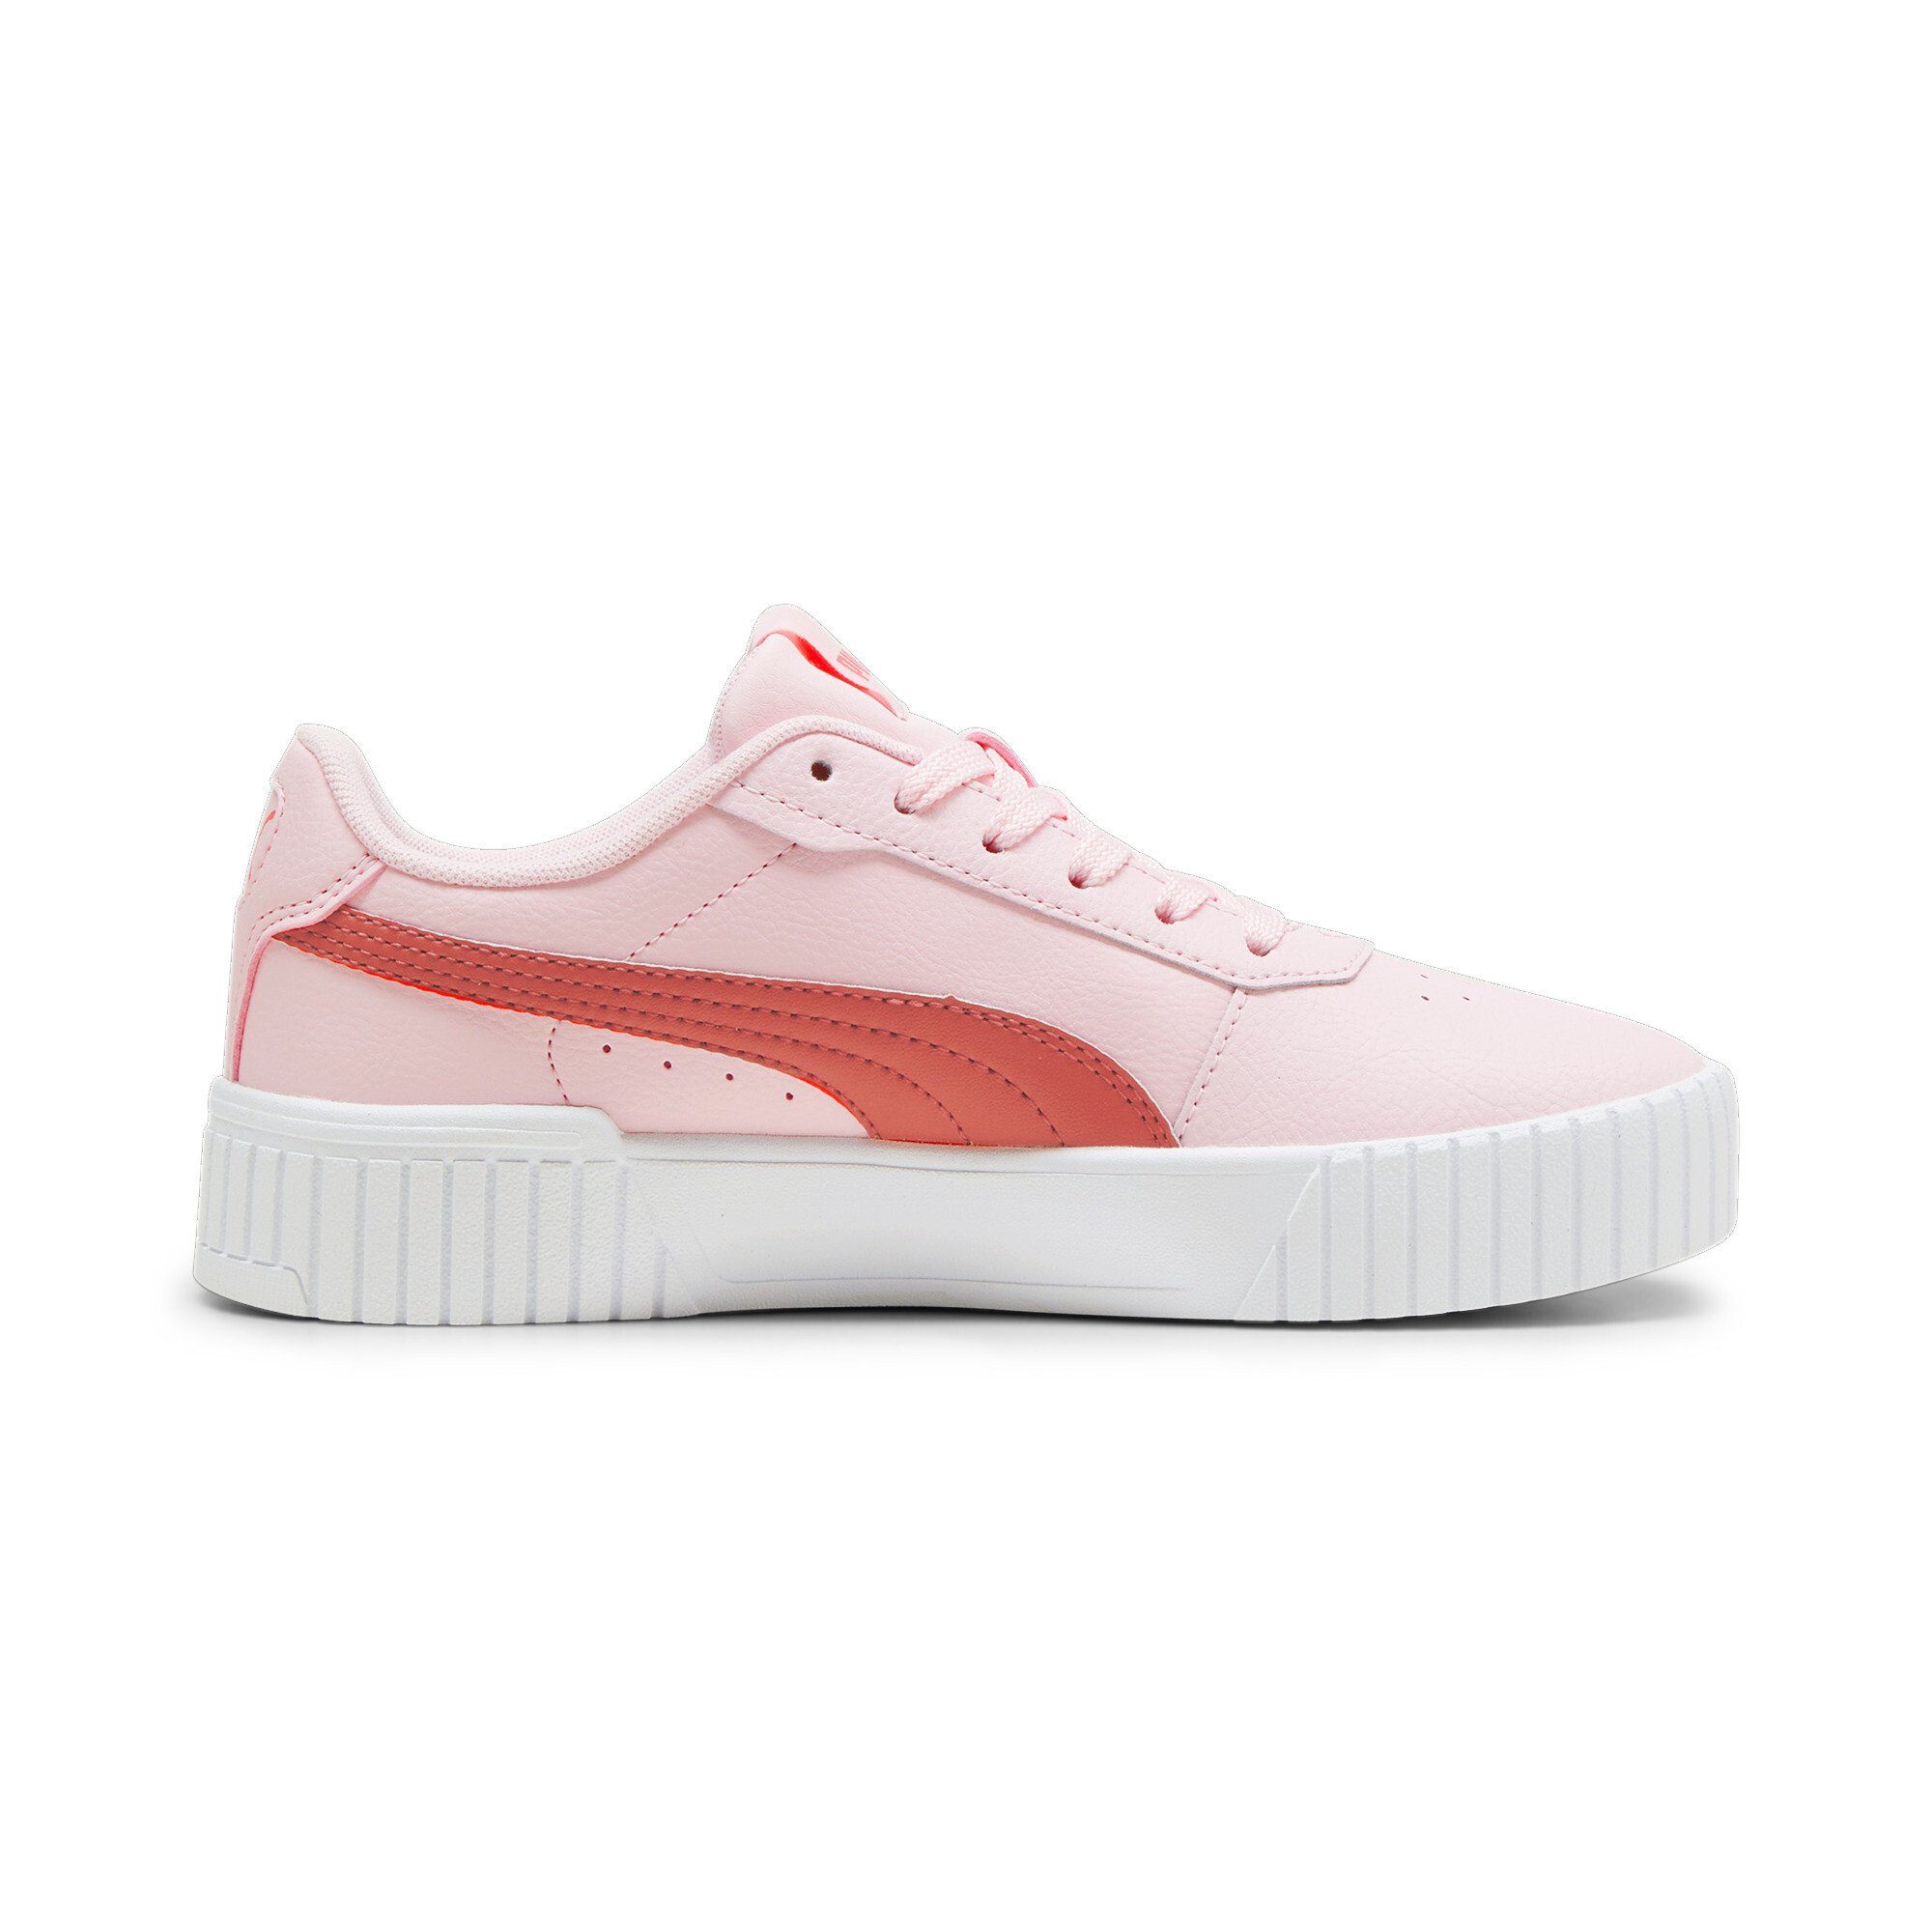 Whisp Pink Active Jugendliche Sneaker White 2.0 Sneakers Red Of Carina PUMA